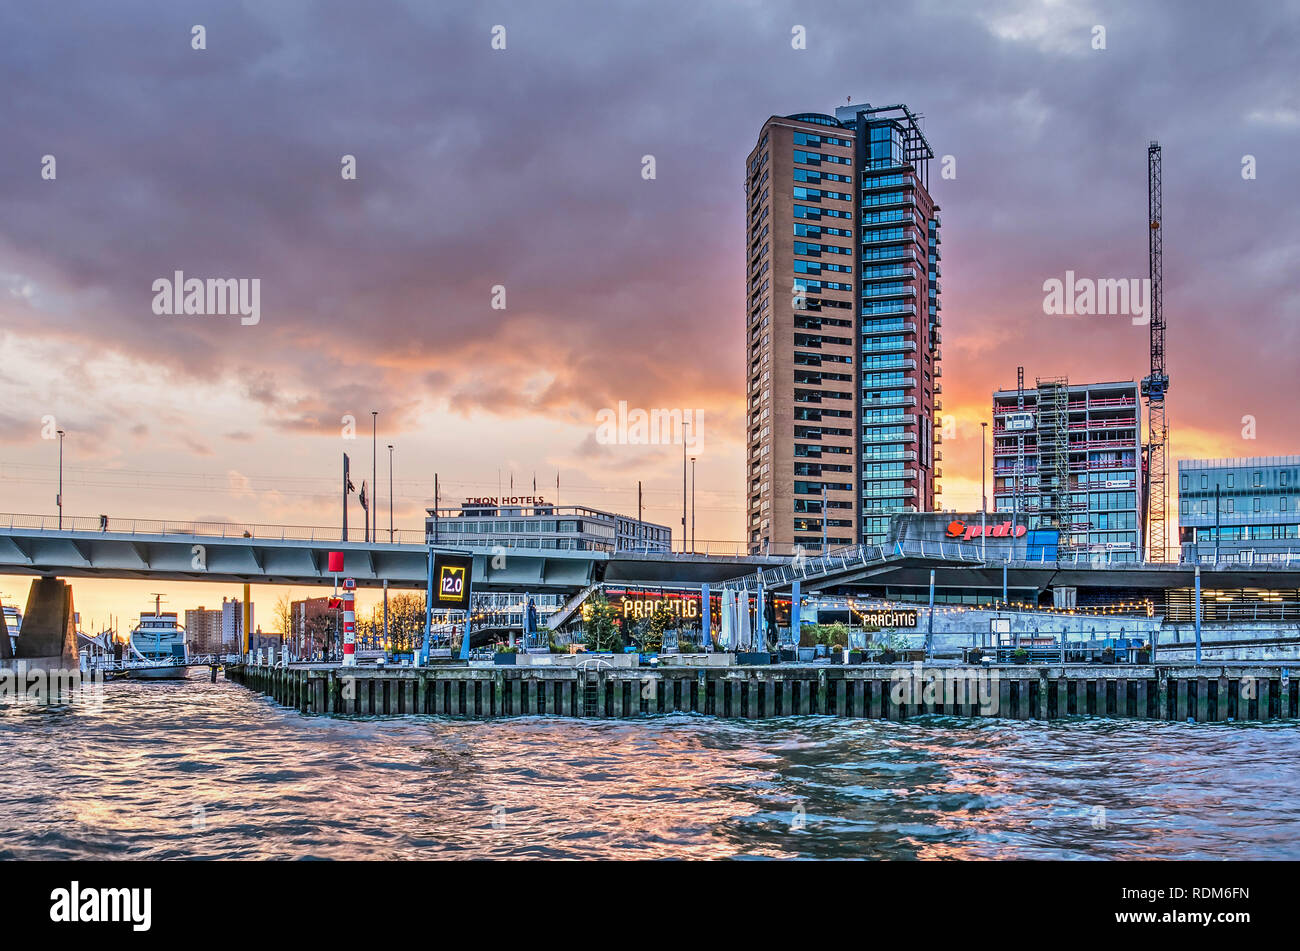 Rotterdam, The Netherlands, December 4, 2018: the Erasmus bridge head with the Prachtig restaurant underneath and residential buildings behind it unde Stock Photo